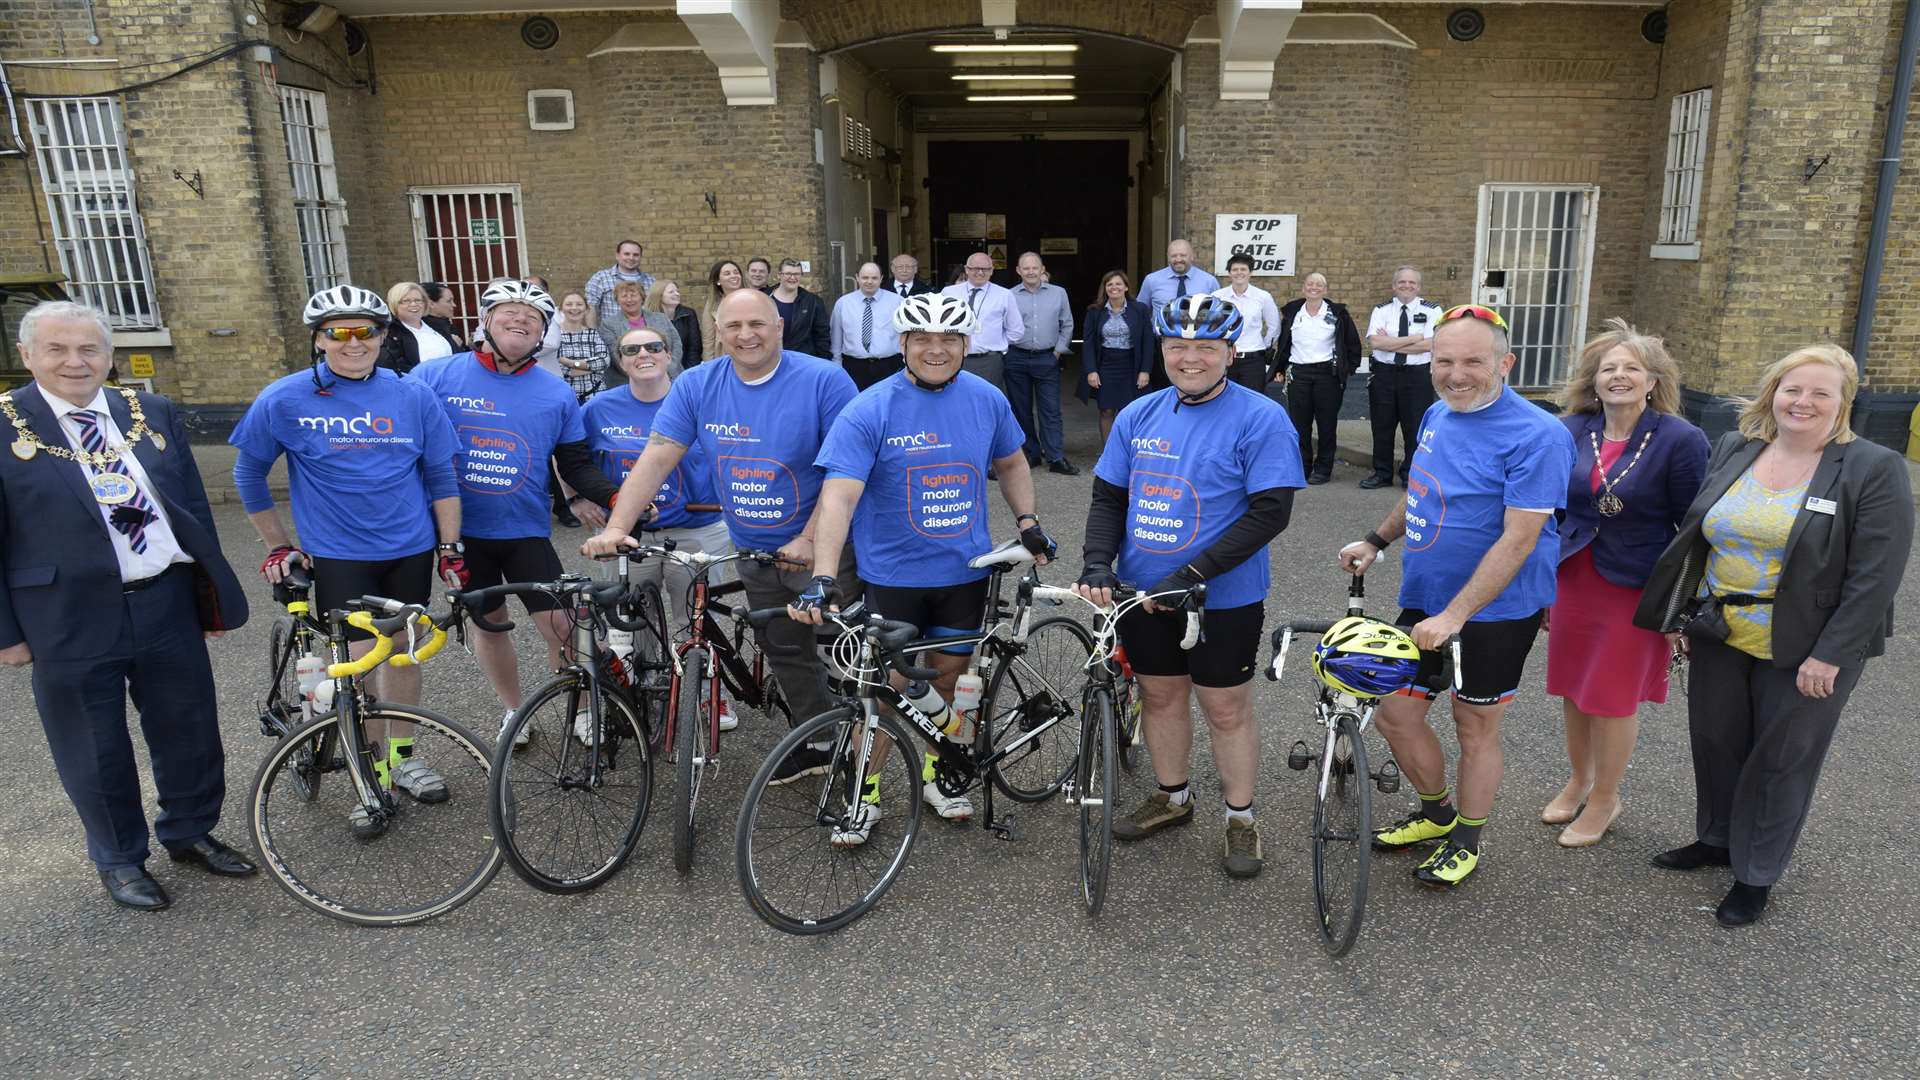 The team raised more than £1,000 for the Motor Neurone Disease Association